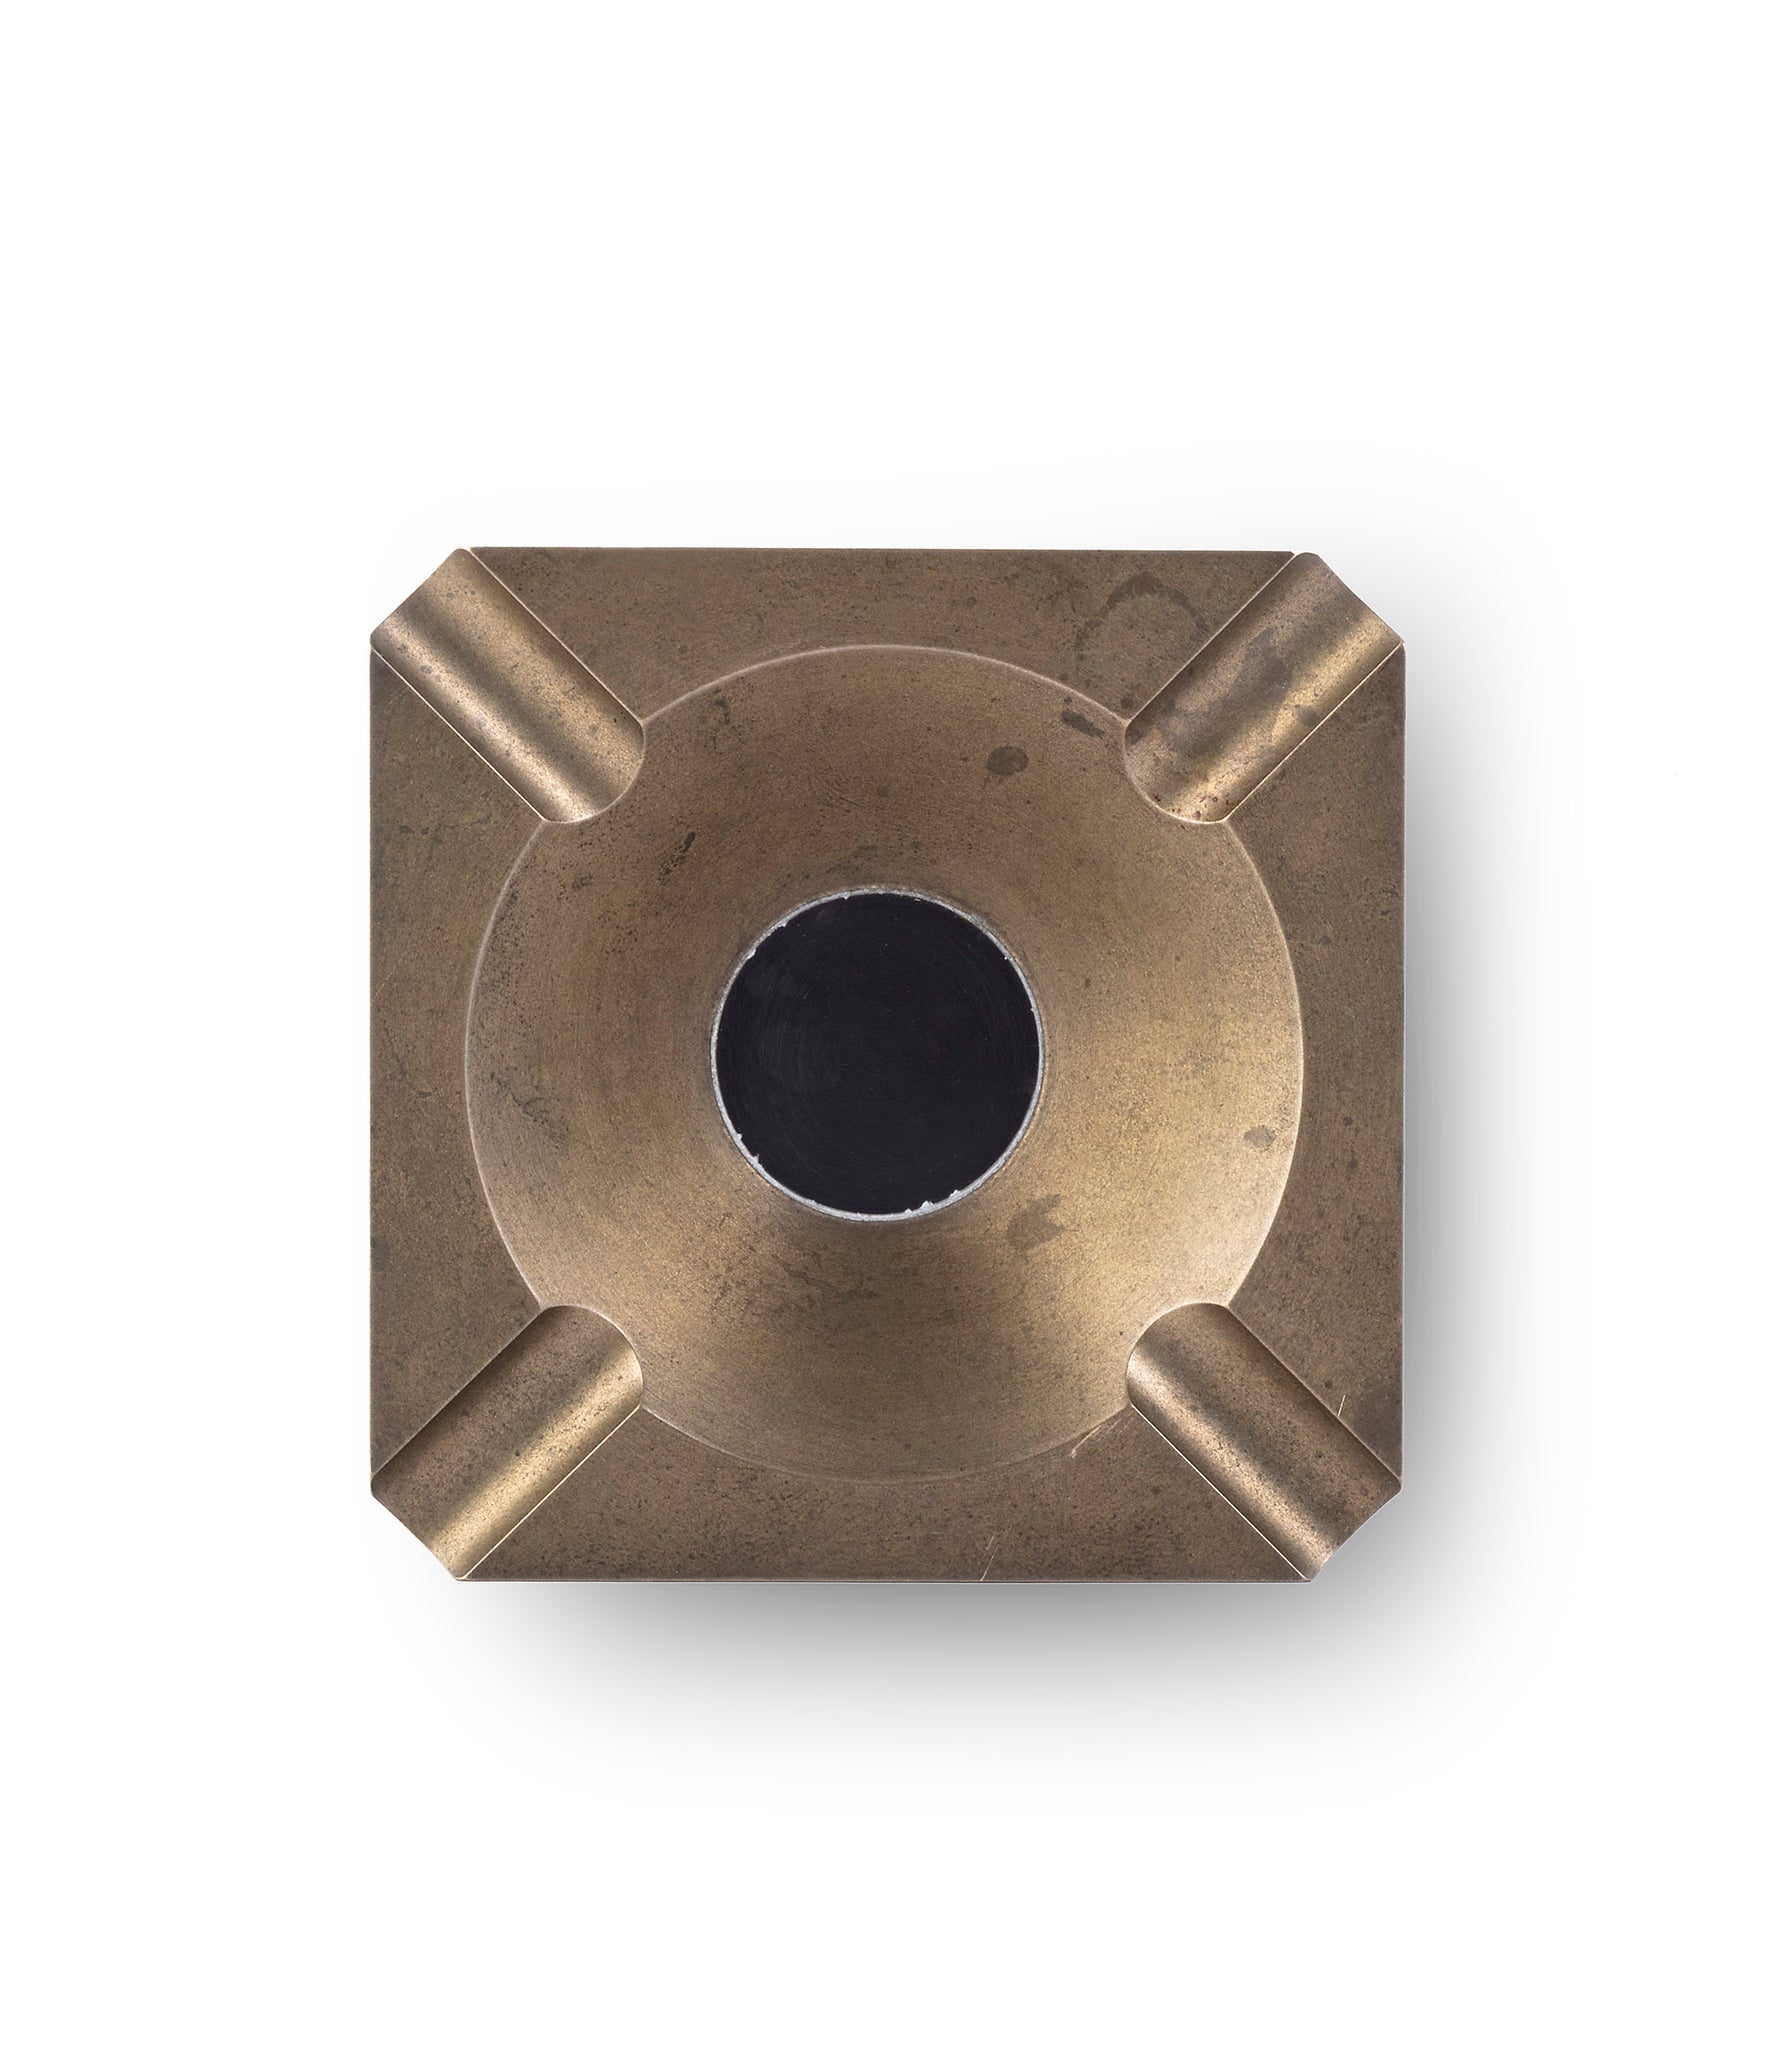 Above shot of vintage collectable Cartier bronze ashtray available to buy at A Collected Man London